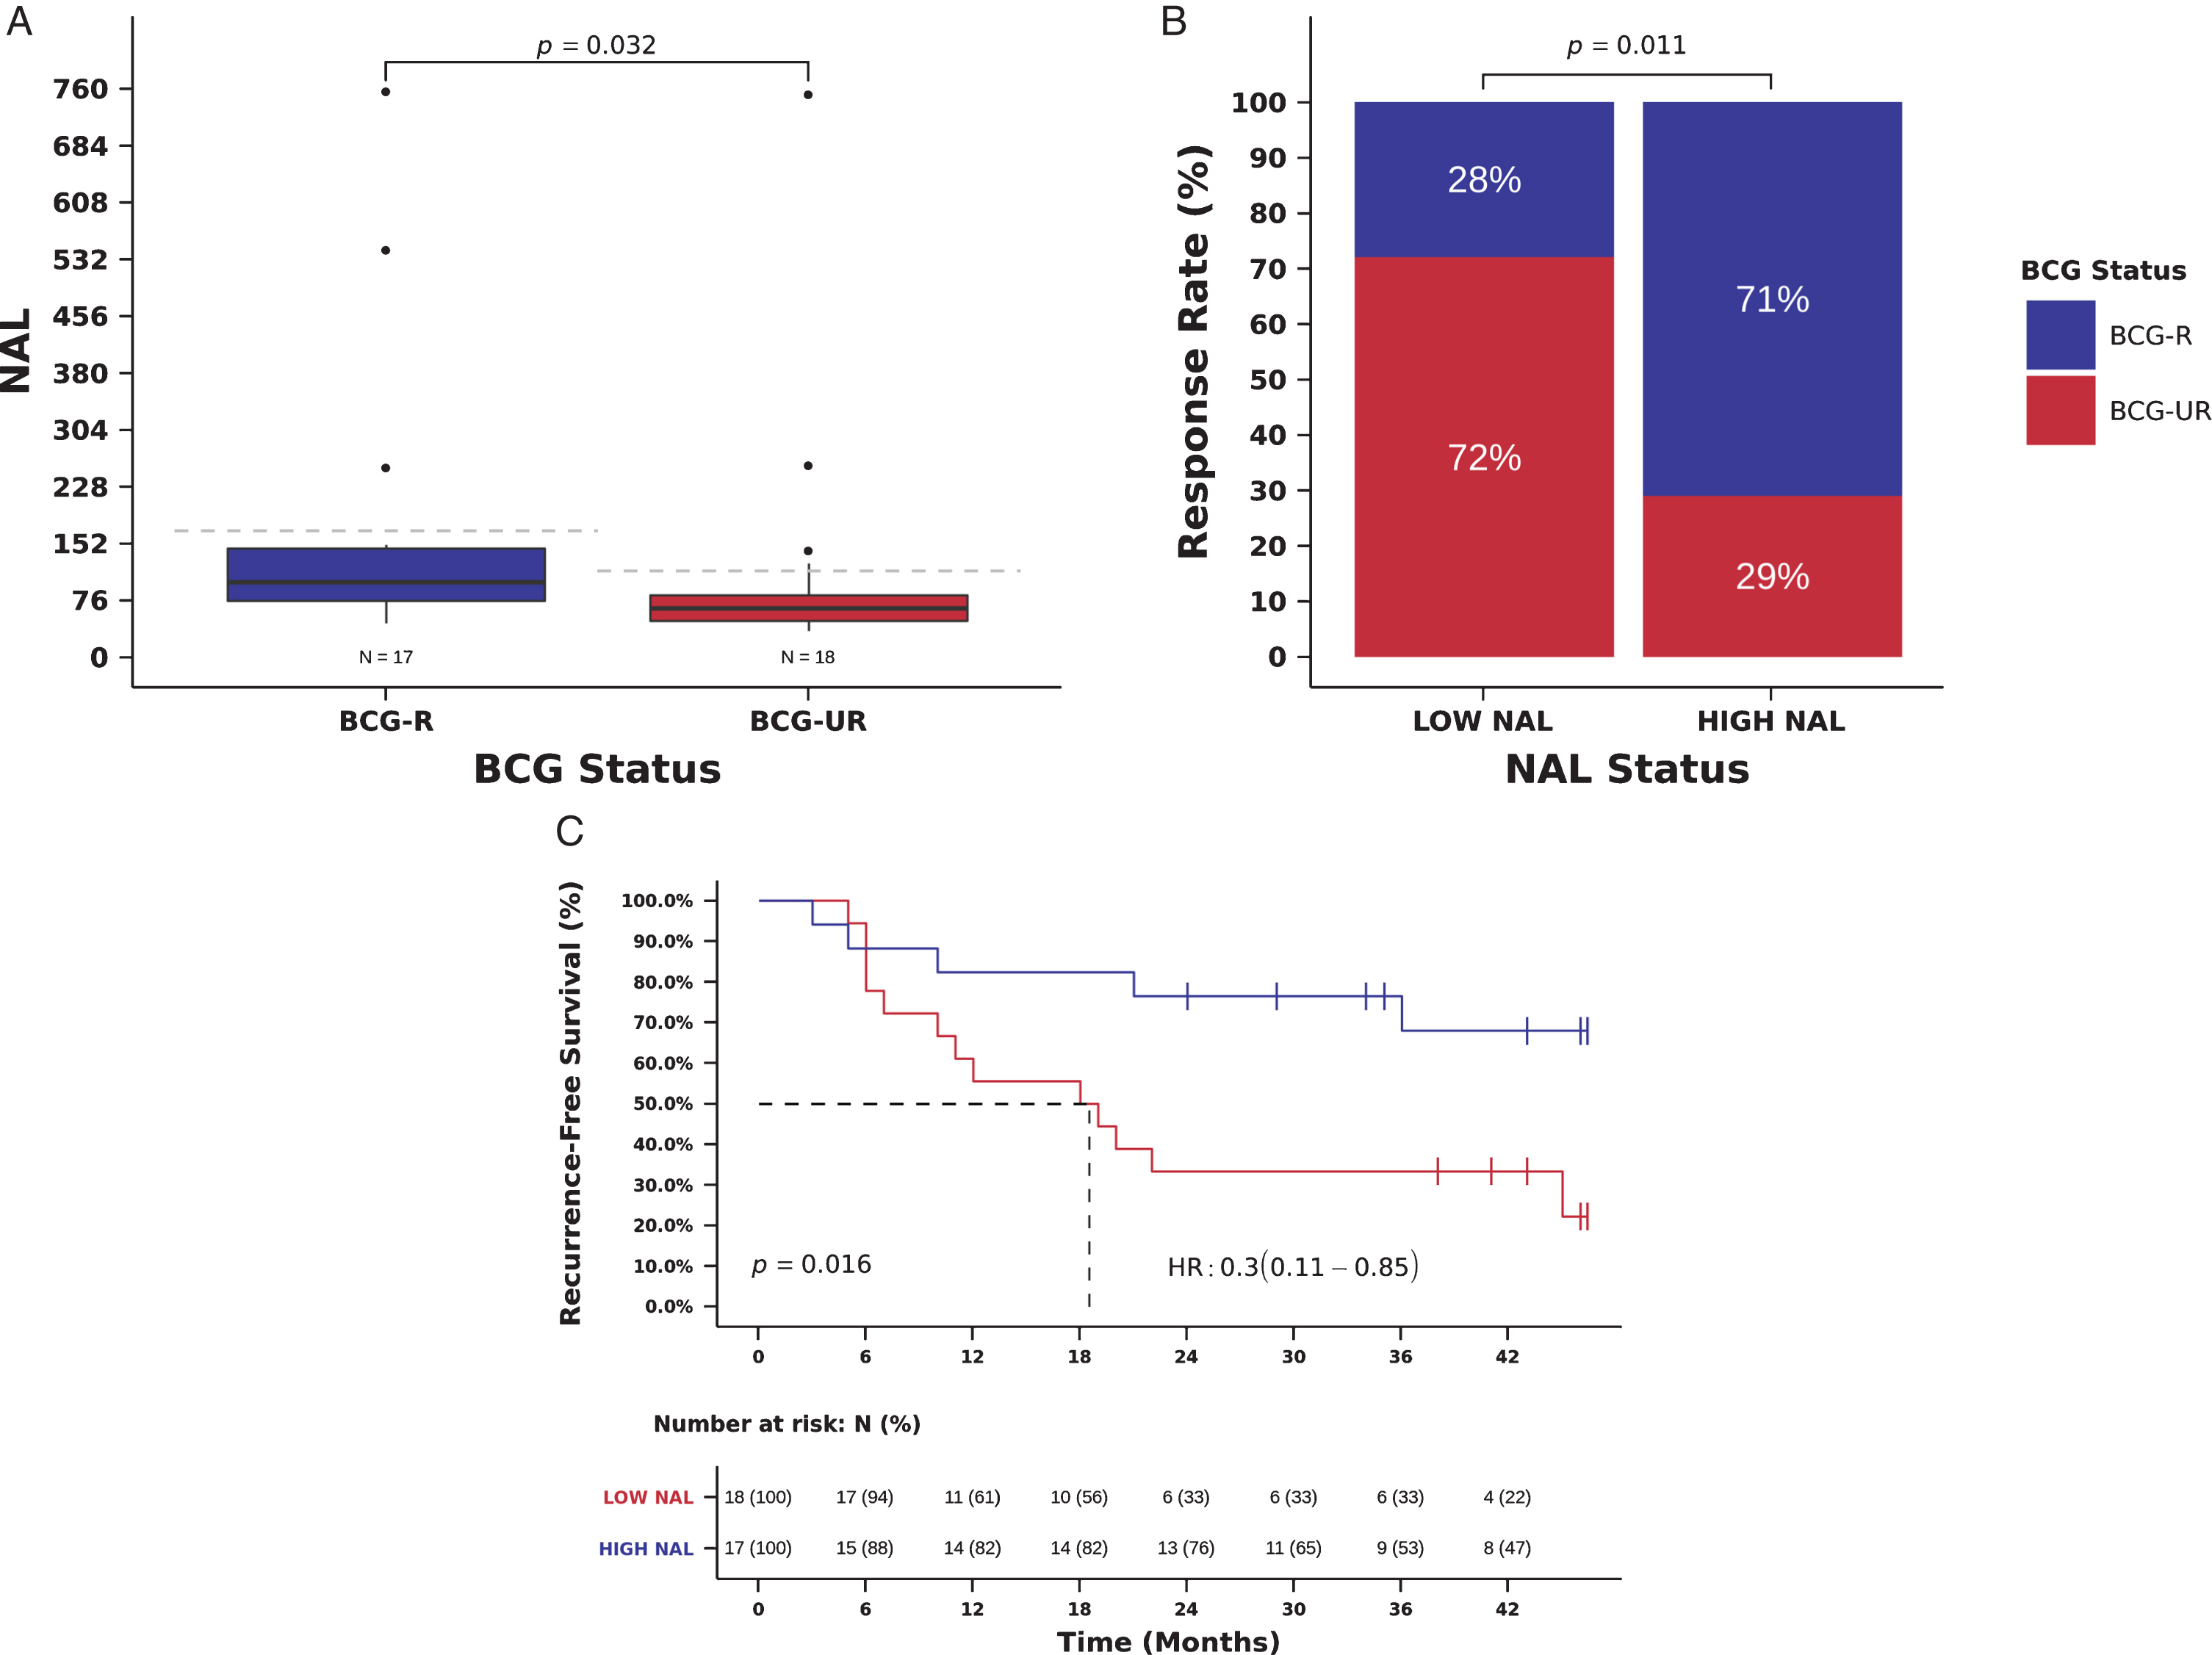 NAL and benefit from BCG immunotherapy. (A) NAL in tumors from patients responsive (BCG-R) and unresponsive (BCG-UR) to BCG immunotherapy (NAL BCG-R=100.0 vs. BCG-UR=65, mutations/Mb, Mann-Whitney P = 0.032) (B) BCG response rate in patients harboring tumors with high NAL (HIGH-NAL) compared to tumors with low NAL (LOW-NAL) (RR HIGH-NAL=71% vs. LOW-NAL=28%, Odds Ratio (OR)=6.24, 95% CI: 1.44-27.06, Pearson Chi-Square P = 0.011) (C) Kaplan-Meier curve for recurrence-free survival after BCG immunotherapy for patients harboring tumors with HIGH-NAL compared to tumors with LOW-NAL. (RFS HIGH-NAL=36 vs. LOW-NAL=18.5 months, Hazard Ratio (HR)=0.30, 95% CI: 0.11- 0.85, Log-rank P = 0.017).